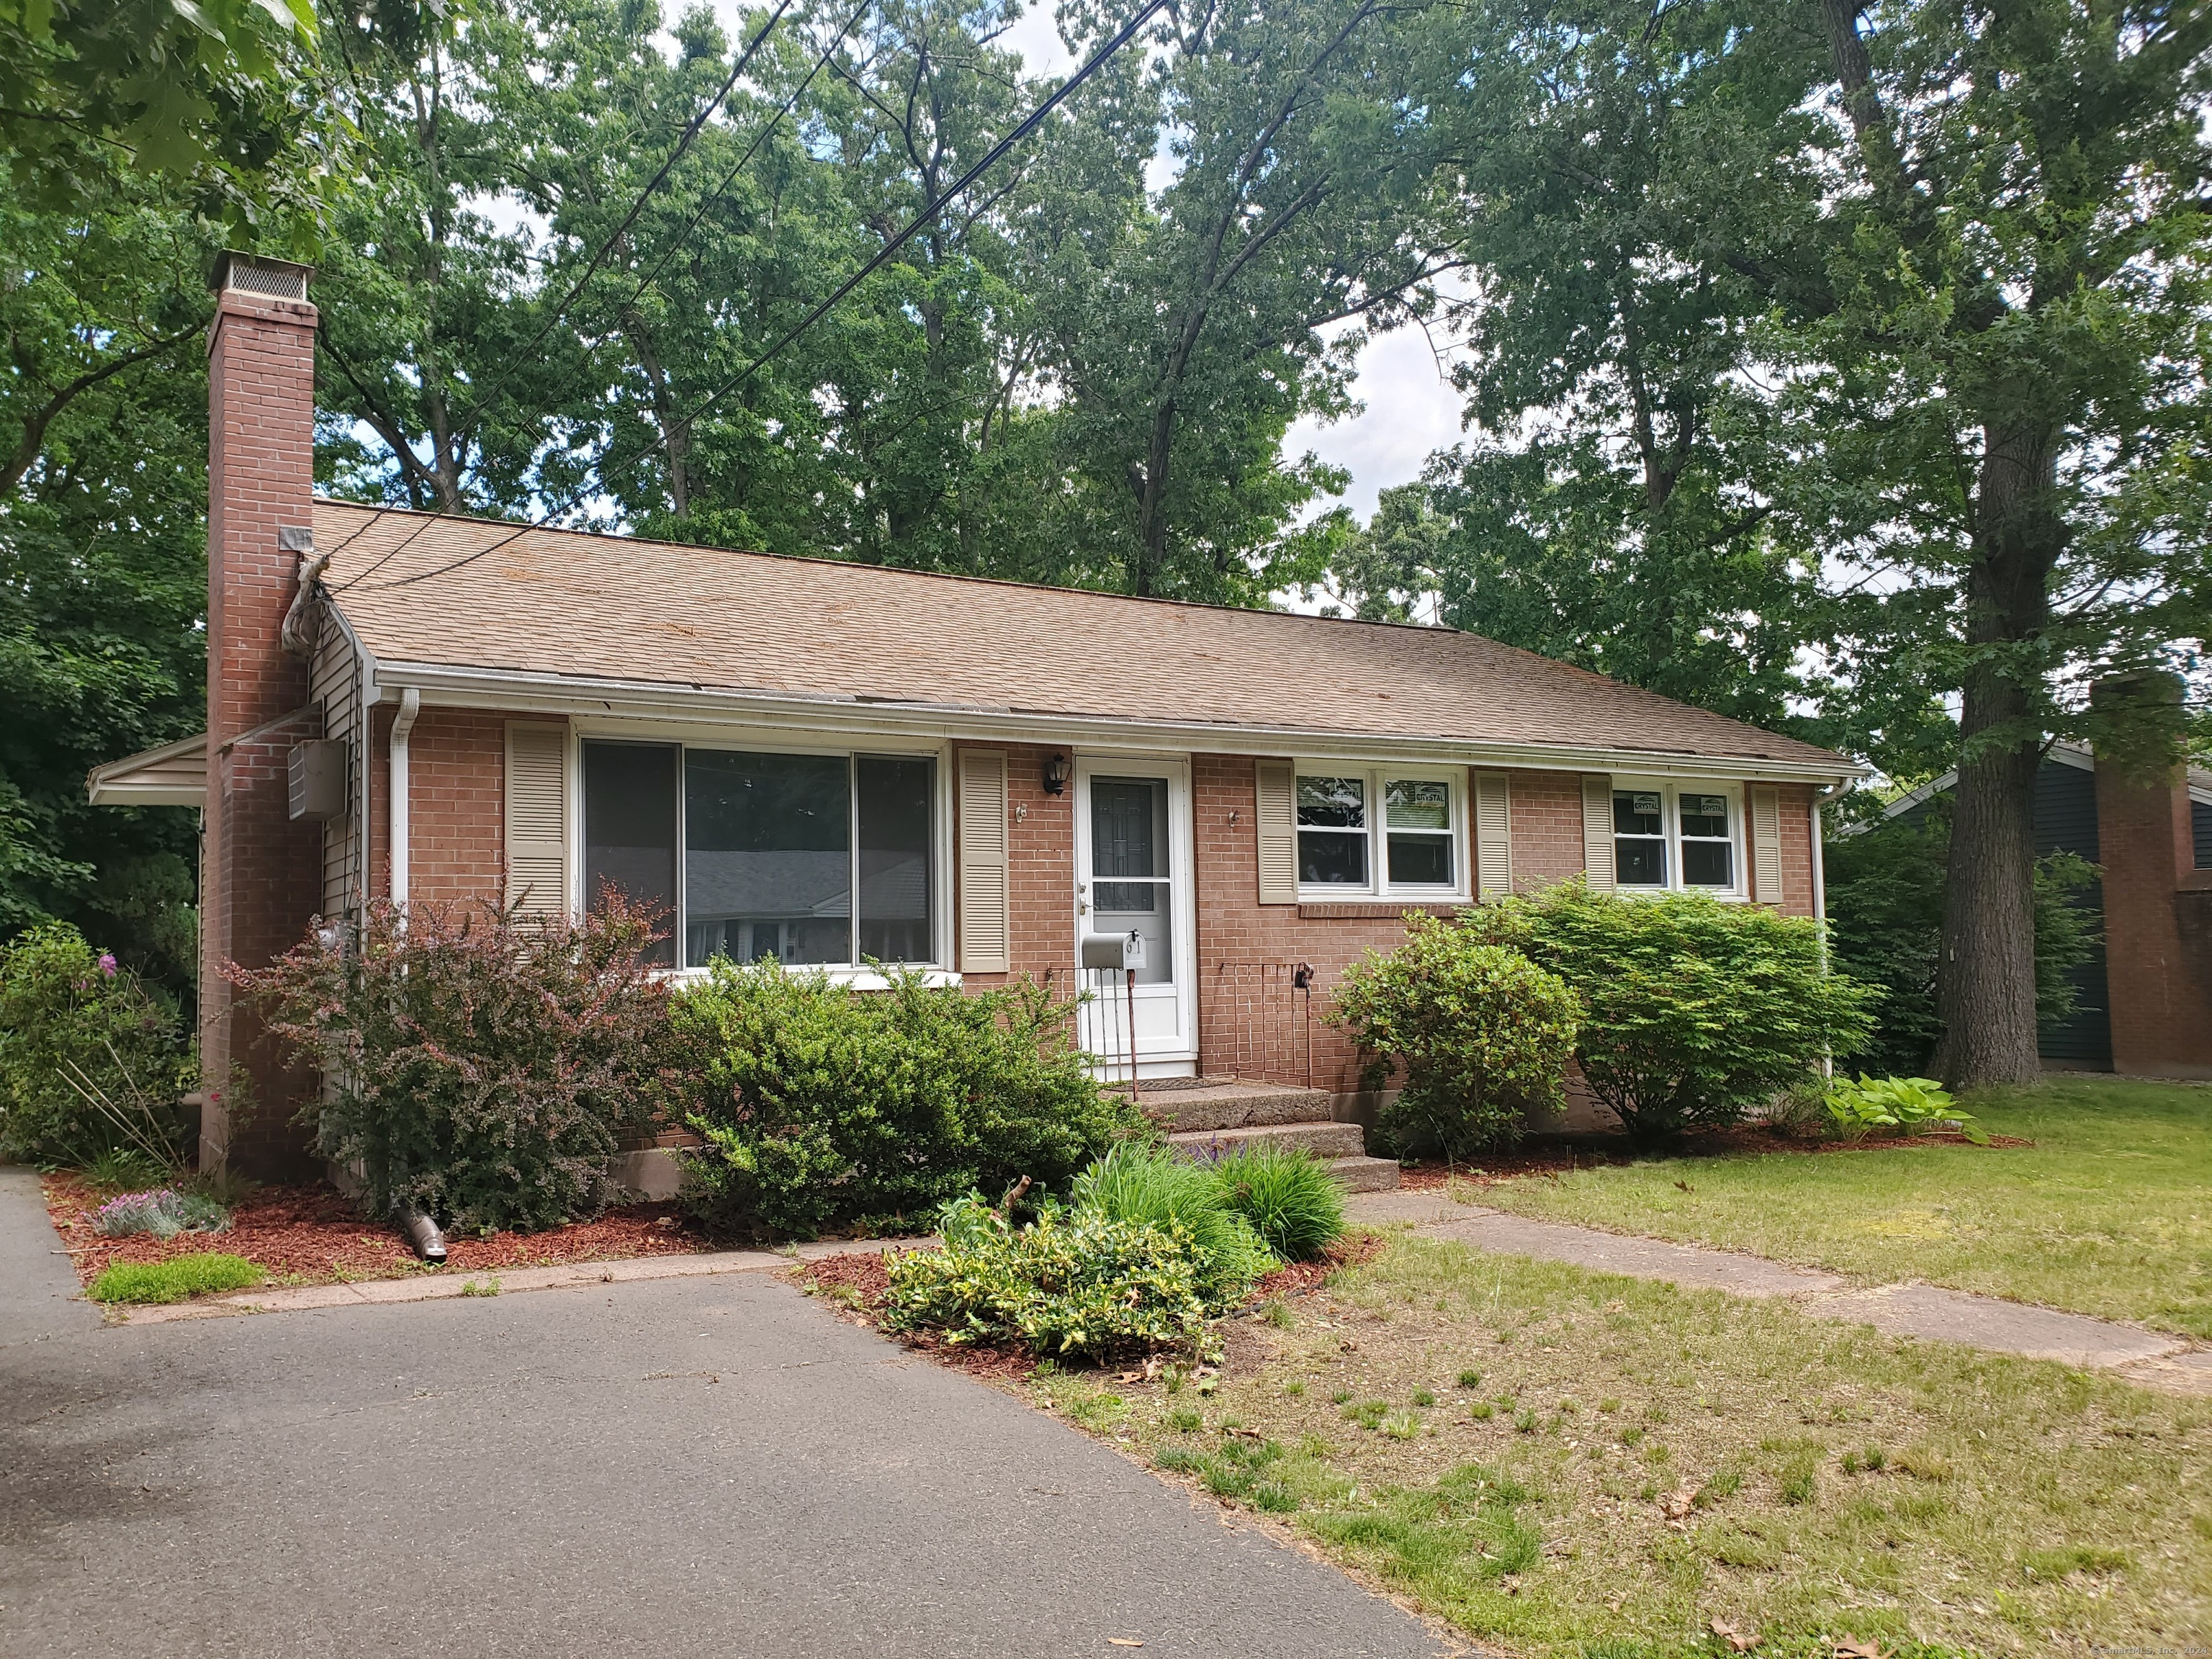 Rental Property at 61 Grant Road, Manchester, Connecticut - Bedrooms: 3 
Bathrooms: 1 
Rooms: 5  - $1,900 MO.